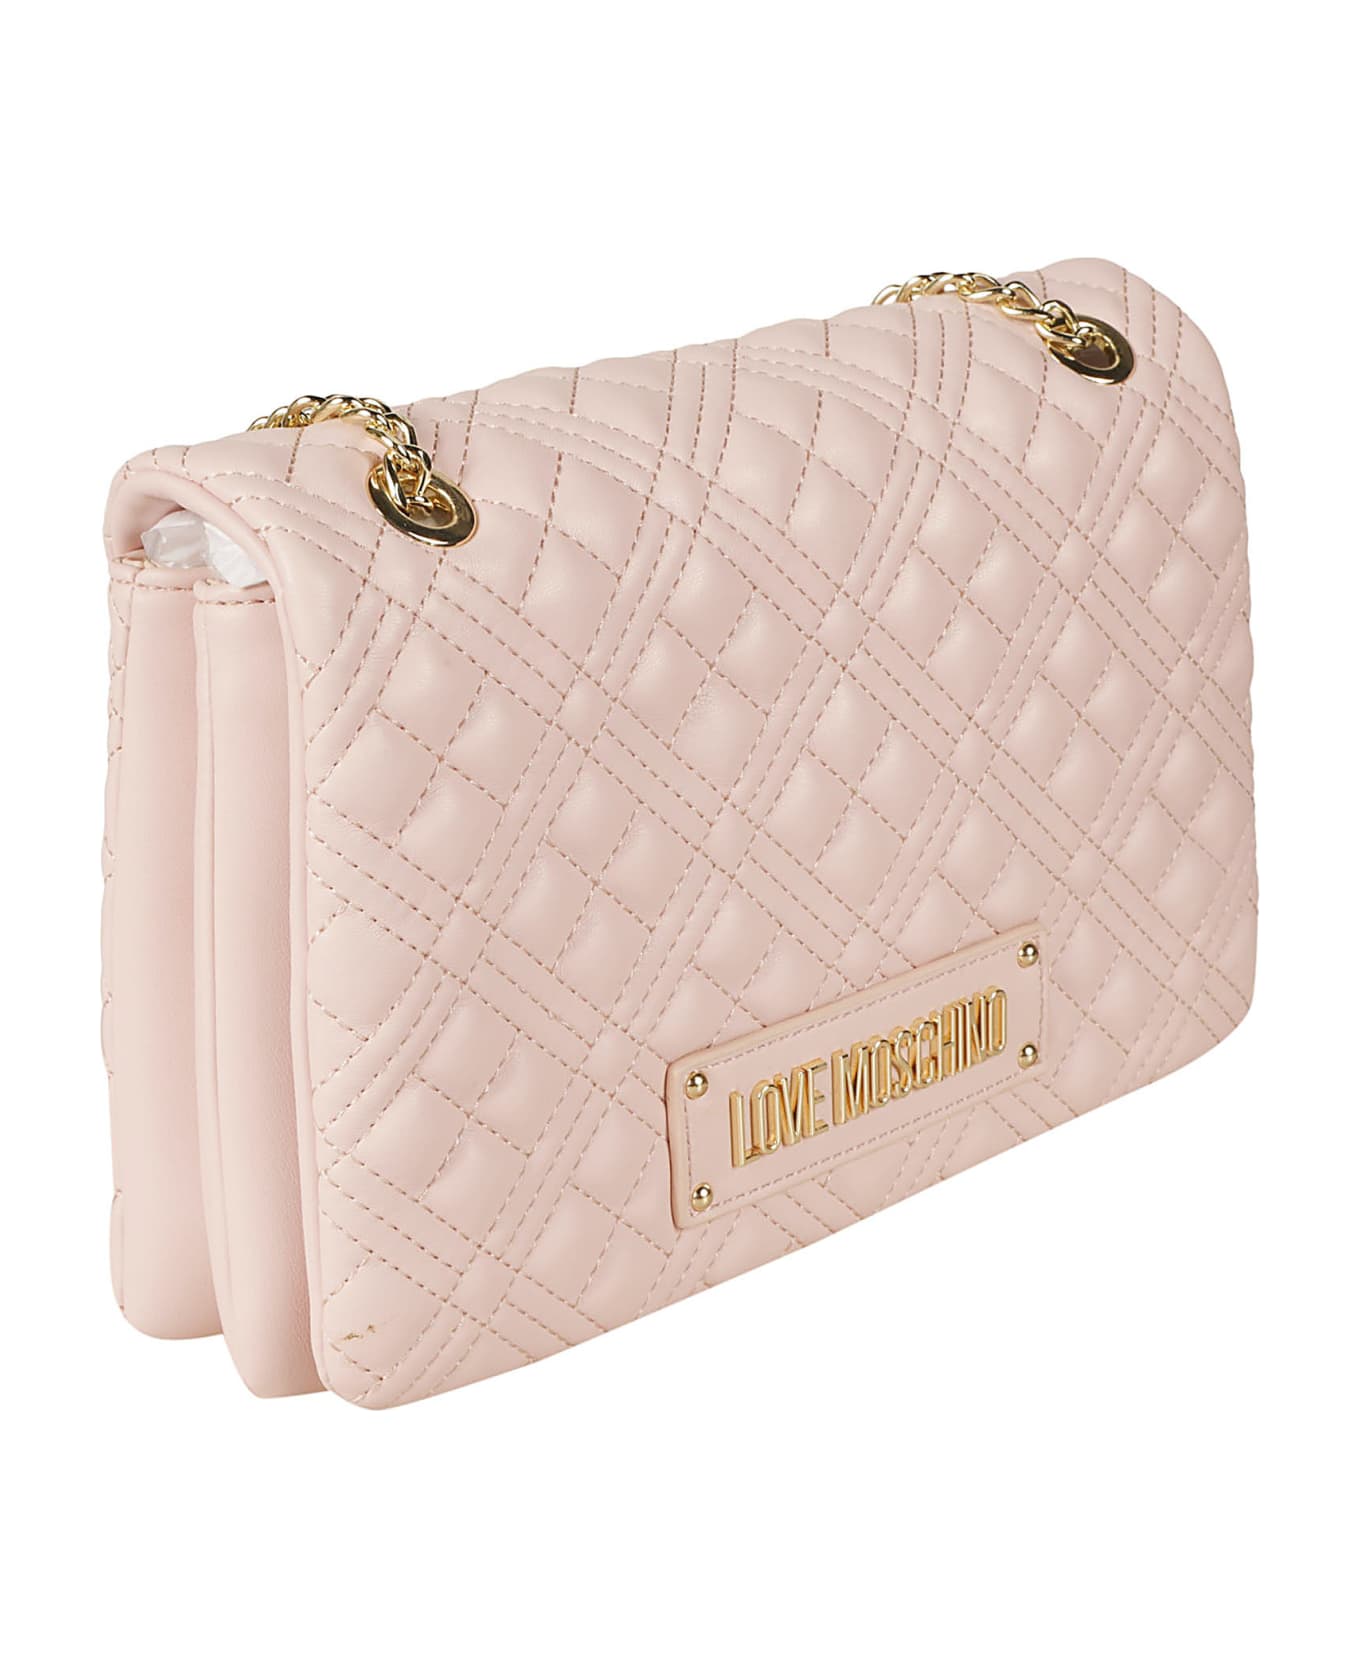 Love Moschino Logo Embossed Quilted Chain Shoulder Bag - Powder